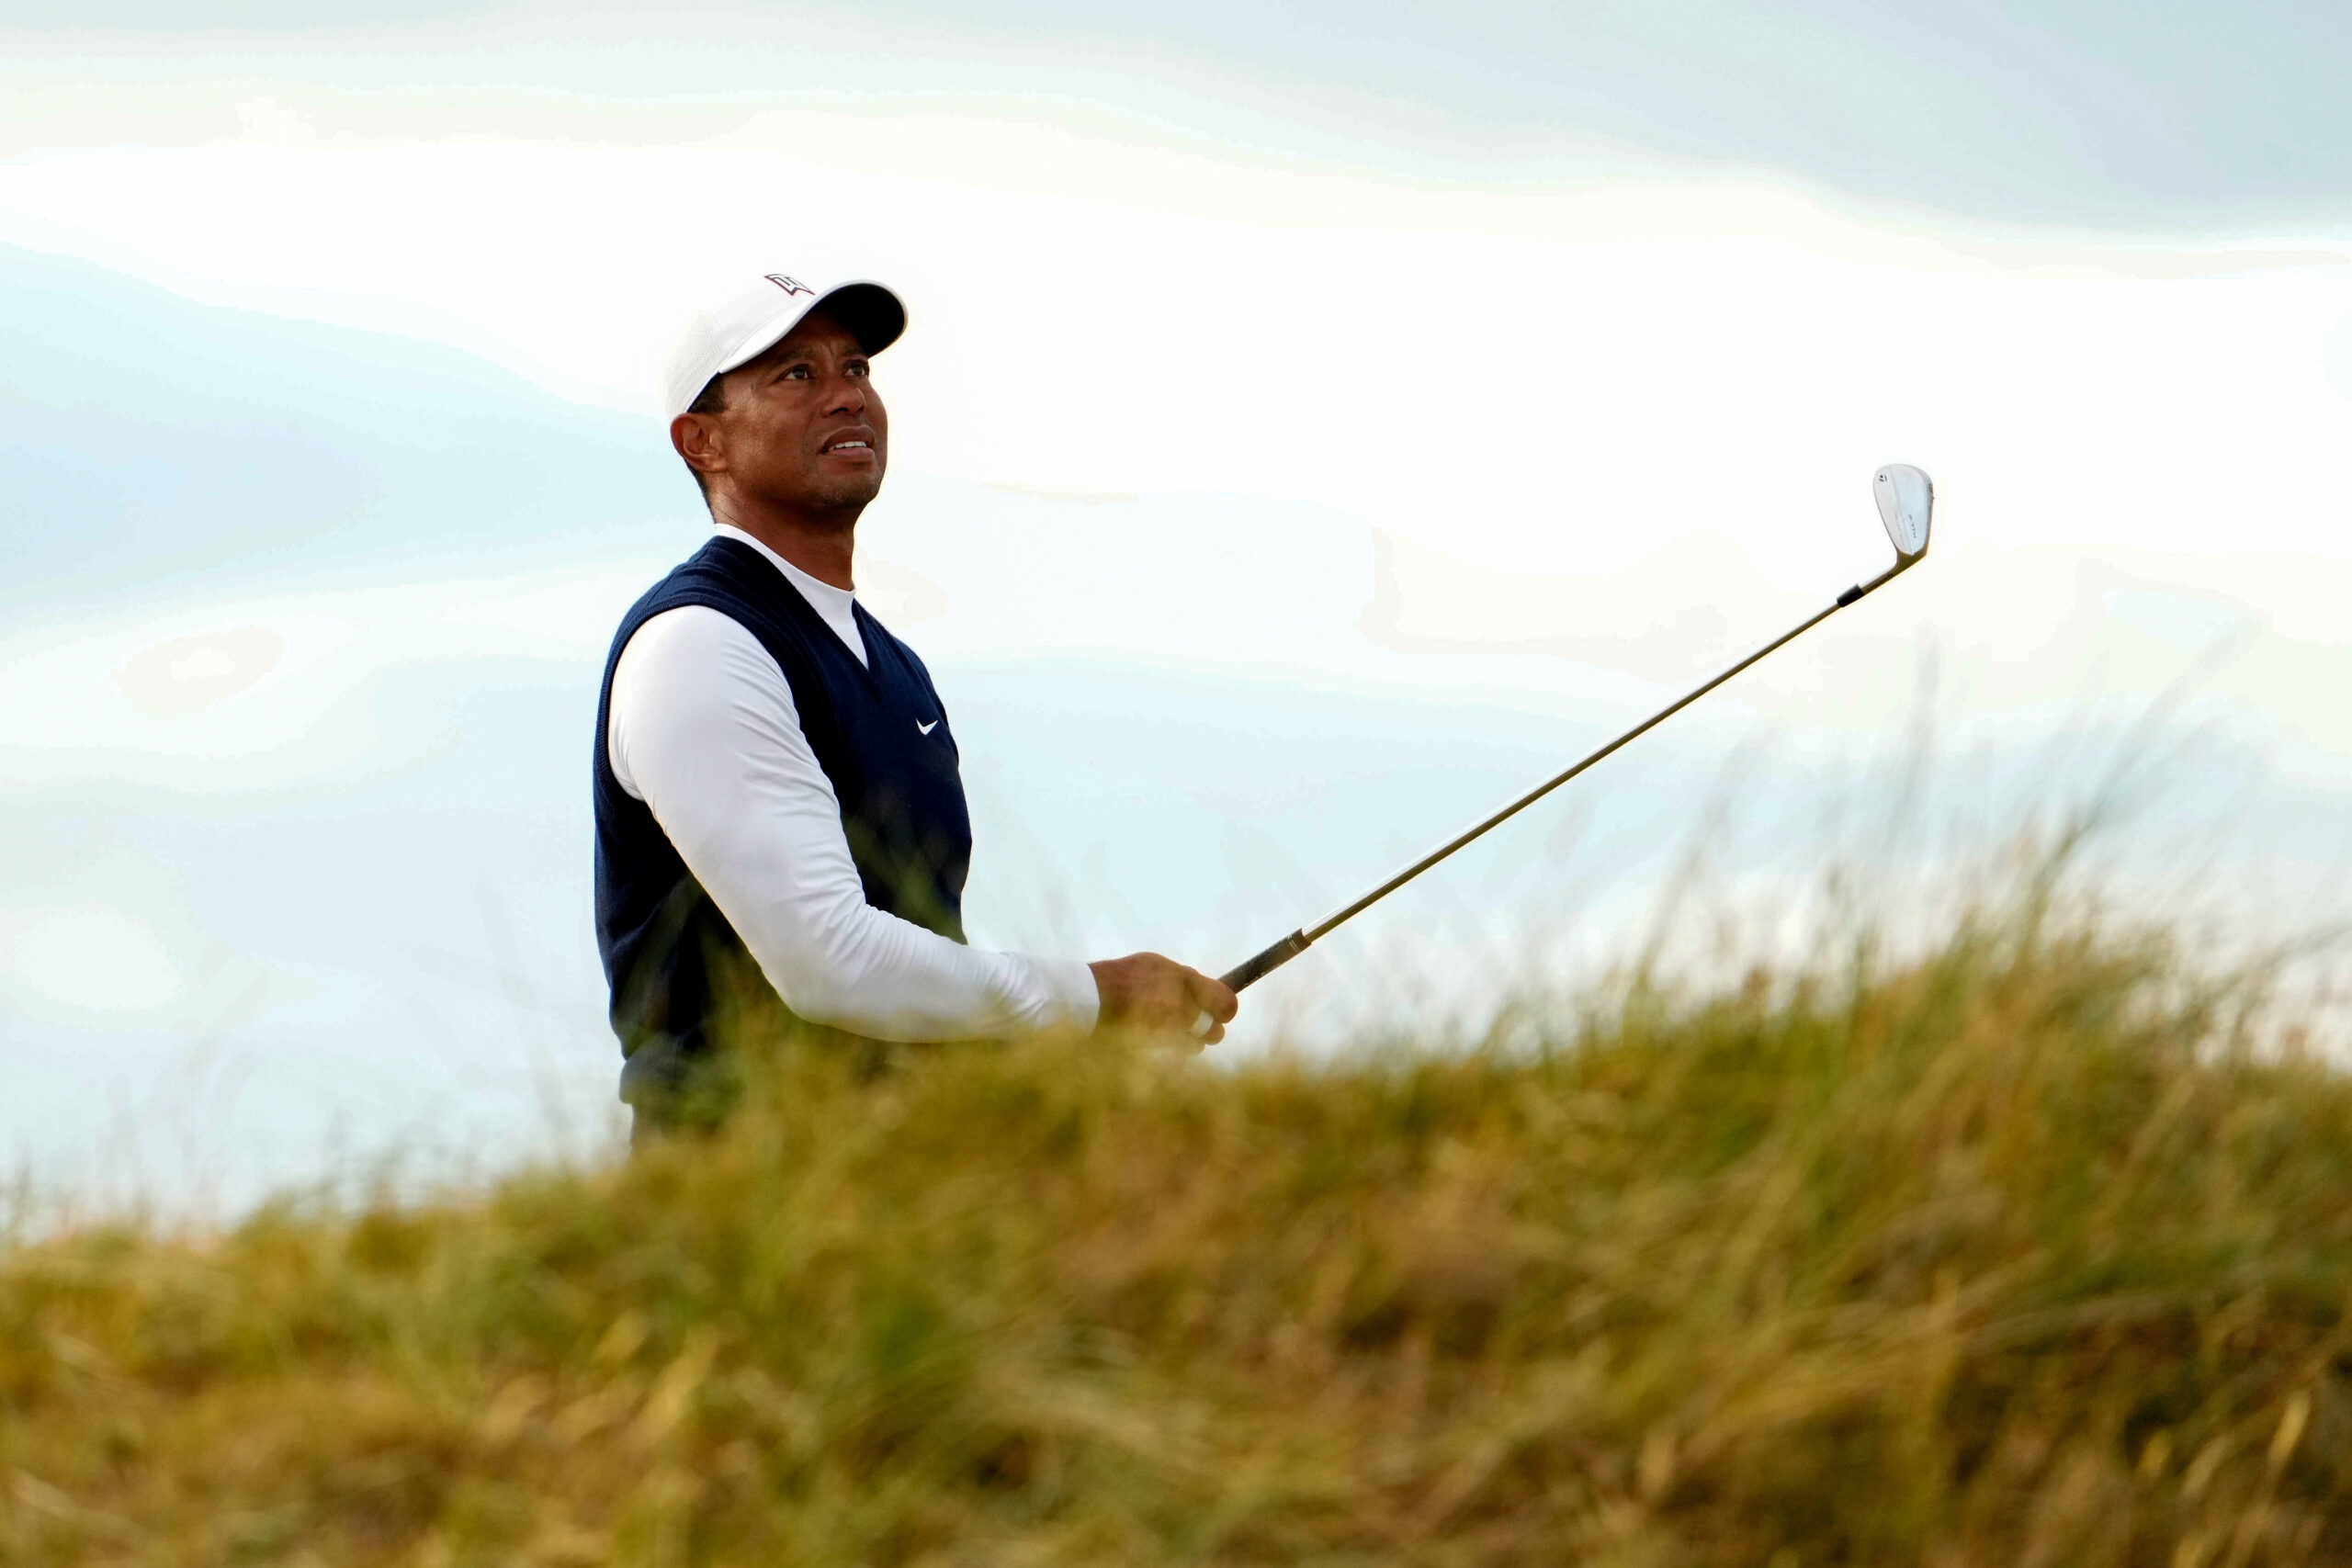 Report: Tiger Woods will not play in the 2023 Open Championship at Royal Liverpool